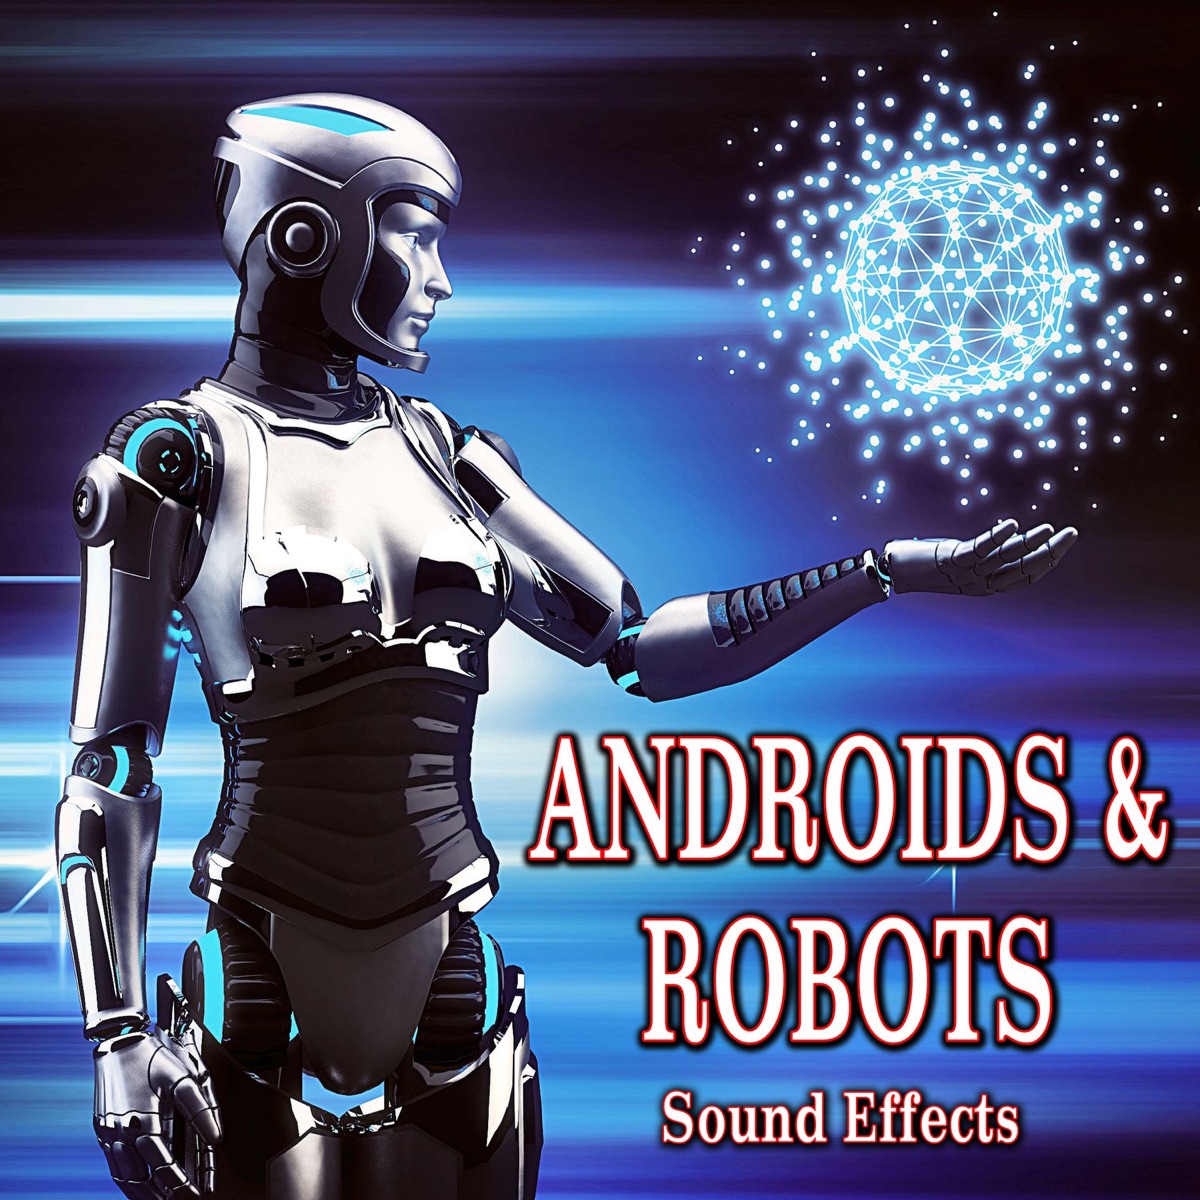 Androids and Robots Sound Effects by Sound Ideas on Apple Music